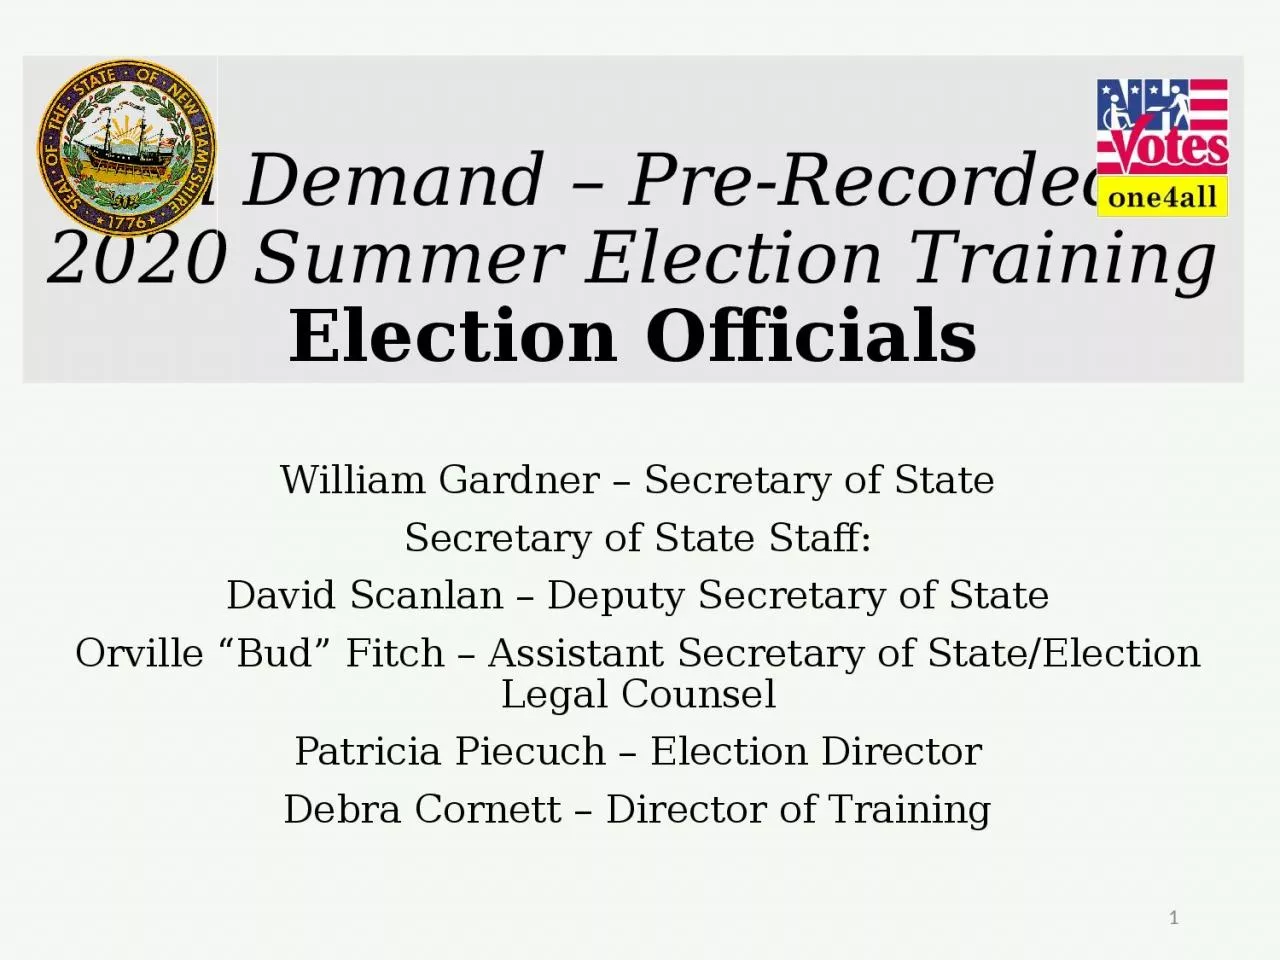 On Demand – Pre-Recorded